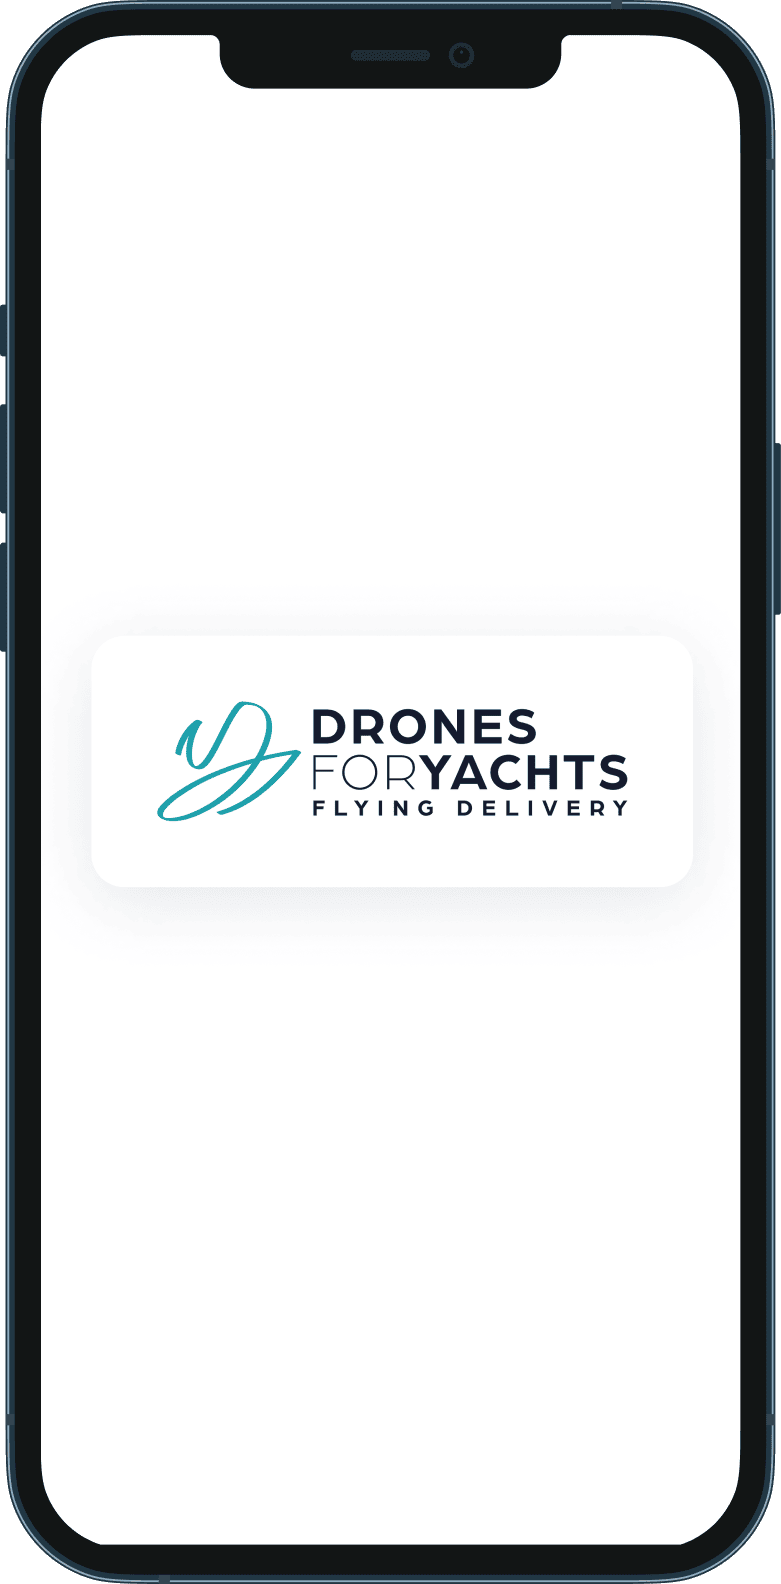 Mobile application for the Drones for Yachts marketplace that delivers packages by drone to yachts